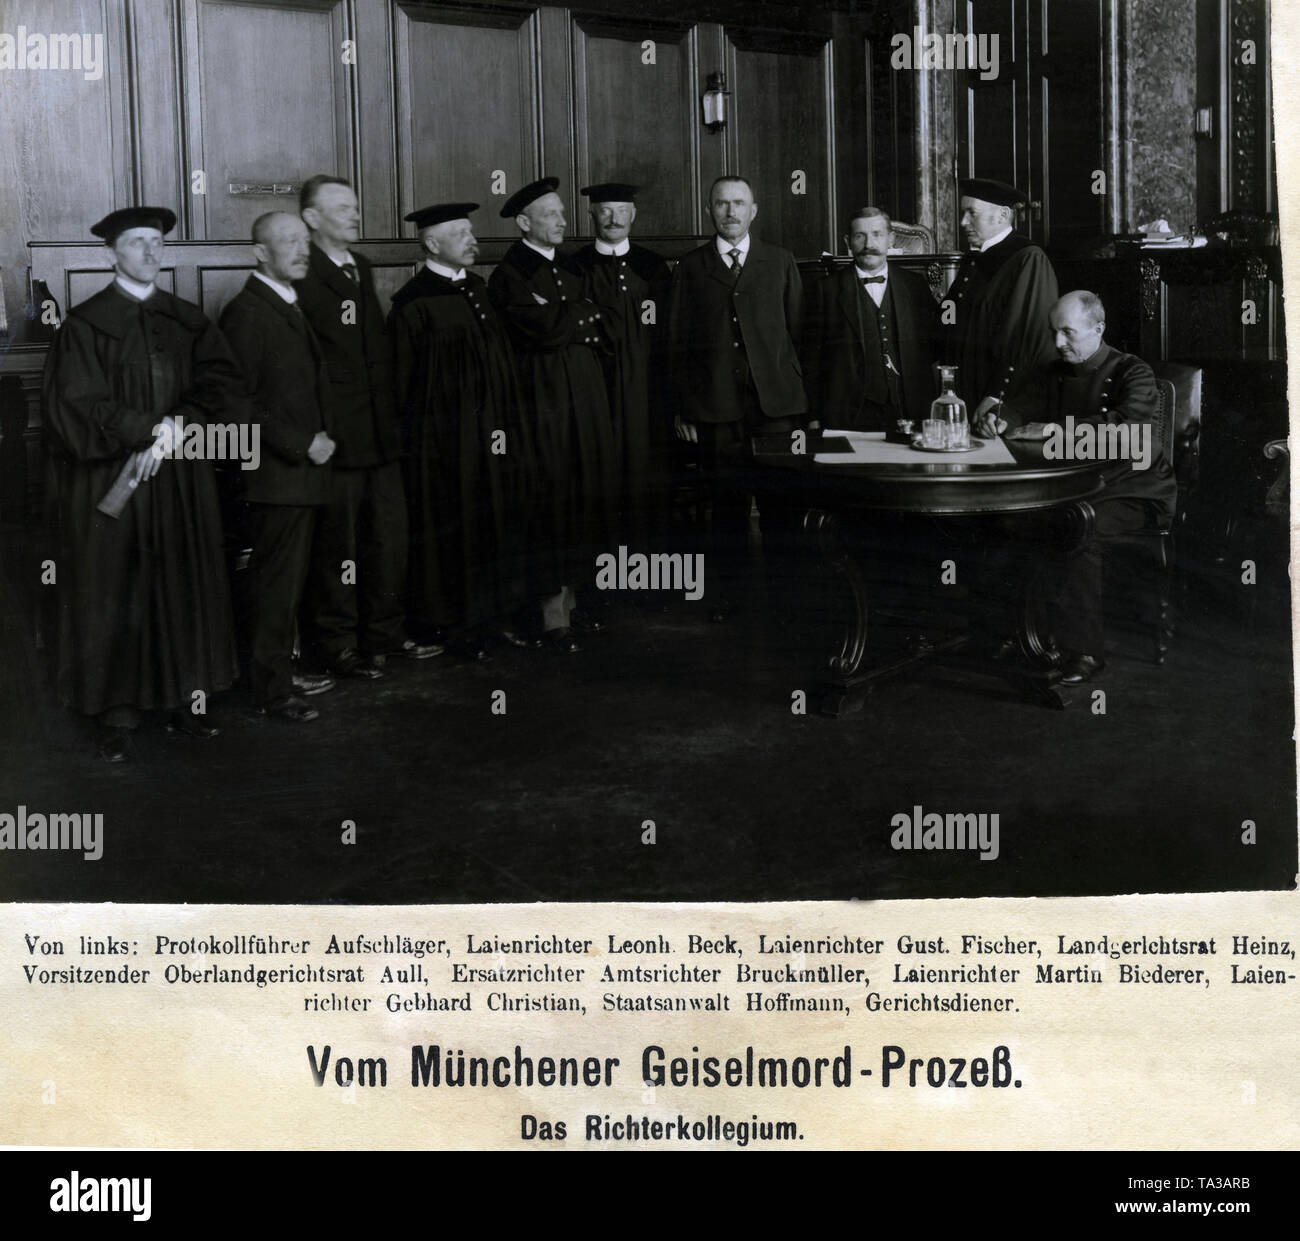 On April 30, 1919 ten members of the government forces were killed in the Luitpold Gymnasium by supporters of the Bavarian Soviet Republic. In September the killers were brought to the people's court of Munich and sentenced to prison terms or death. The picture shows the judges' committee of the trial (from left): clerk, lay judge Leonhard Beck, lay judge Gustav Fischer, District Court Councillor Heinz, chairman of the Higher Regional Court Aull, Circuit Judge Bruckmueller, lay judge Martin Biederer, lay judge Gebhard Christian, prosecutor Hoffmann, court usher. Stock Photo